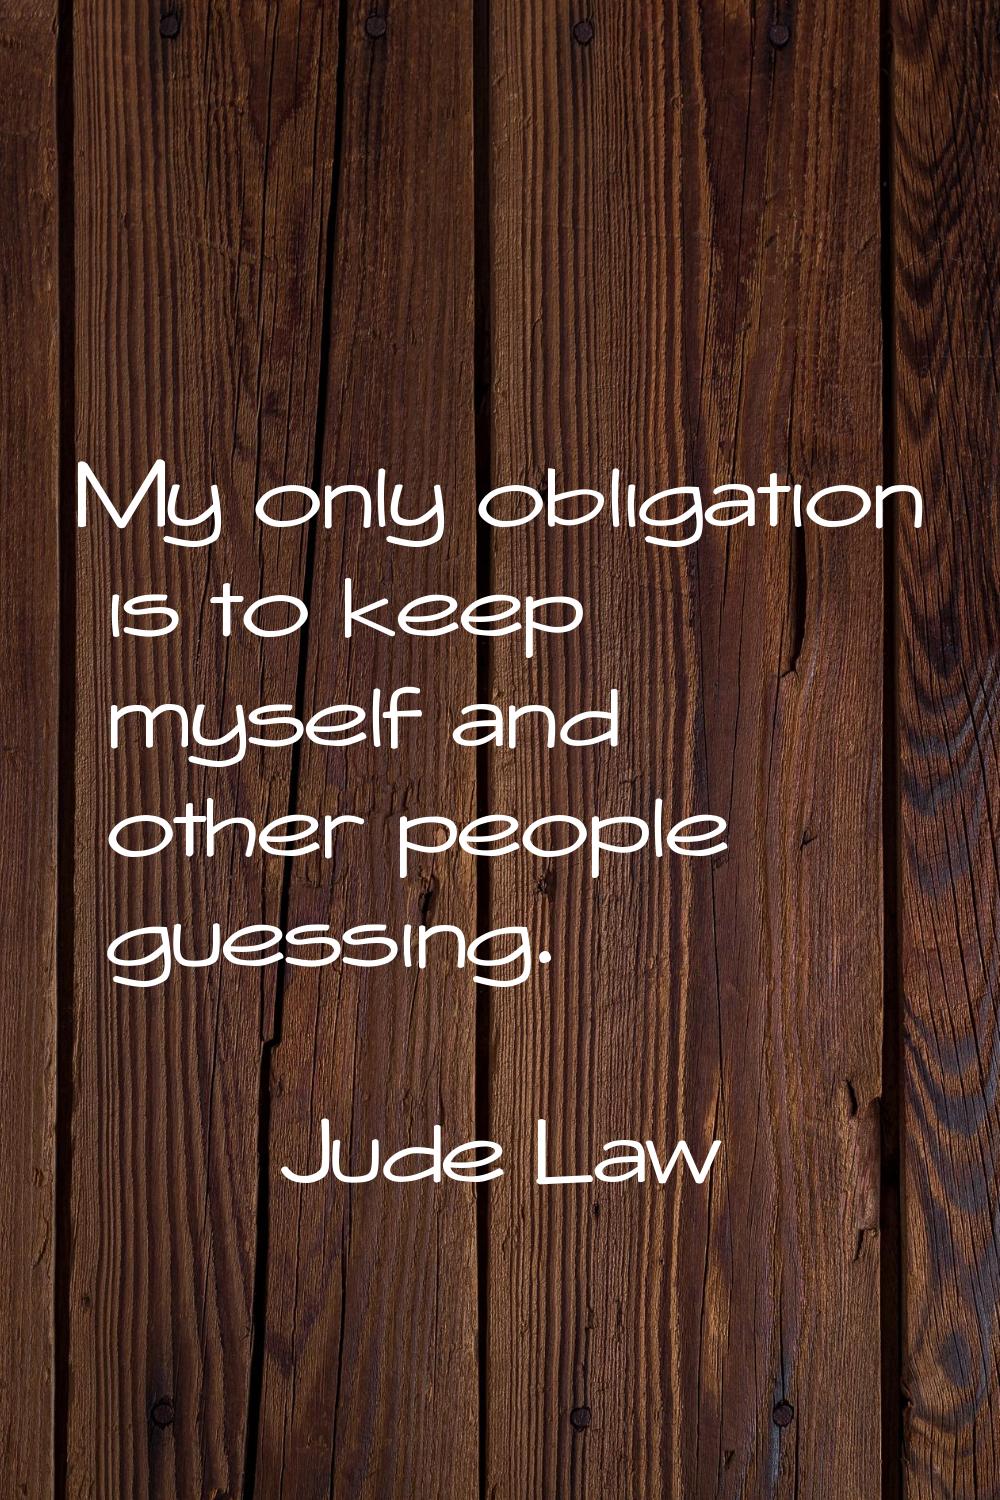 My only obligation is to keep myself and other people guessing.